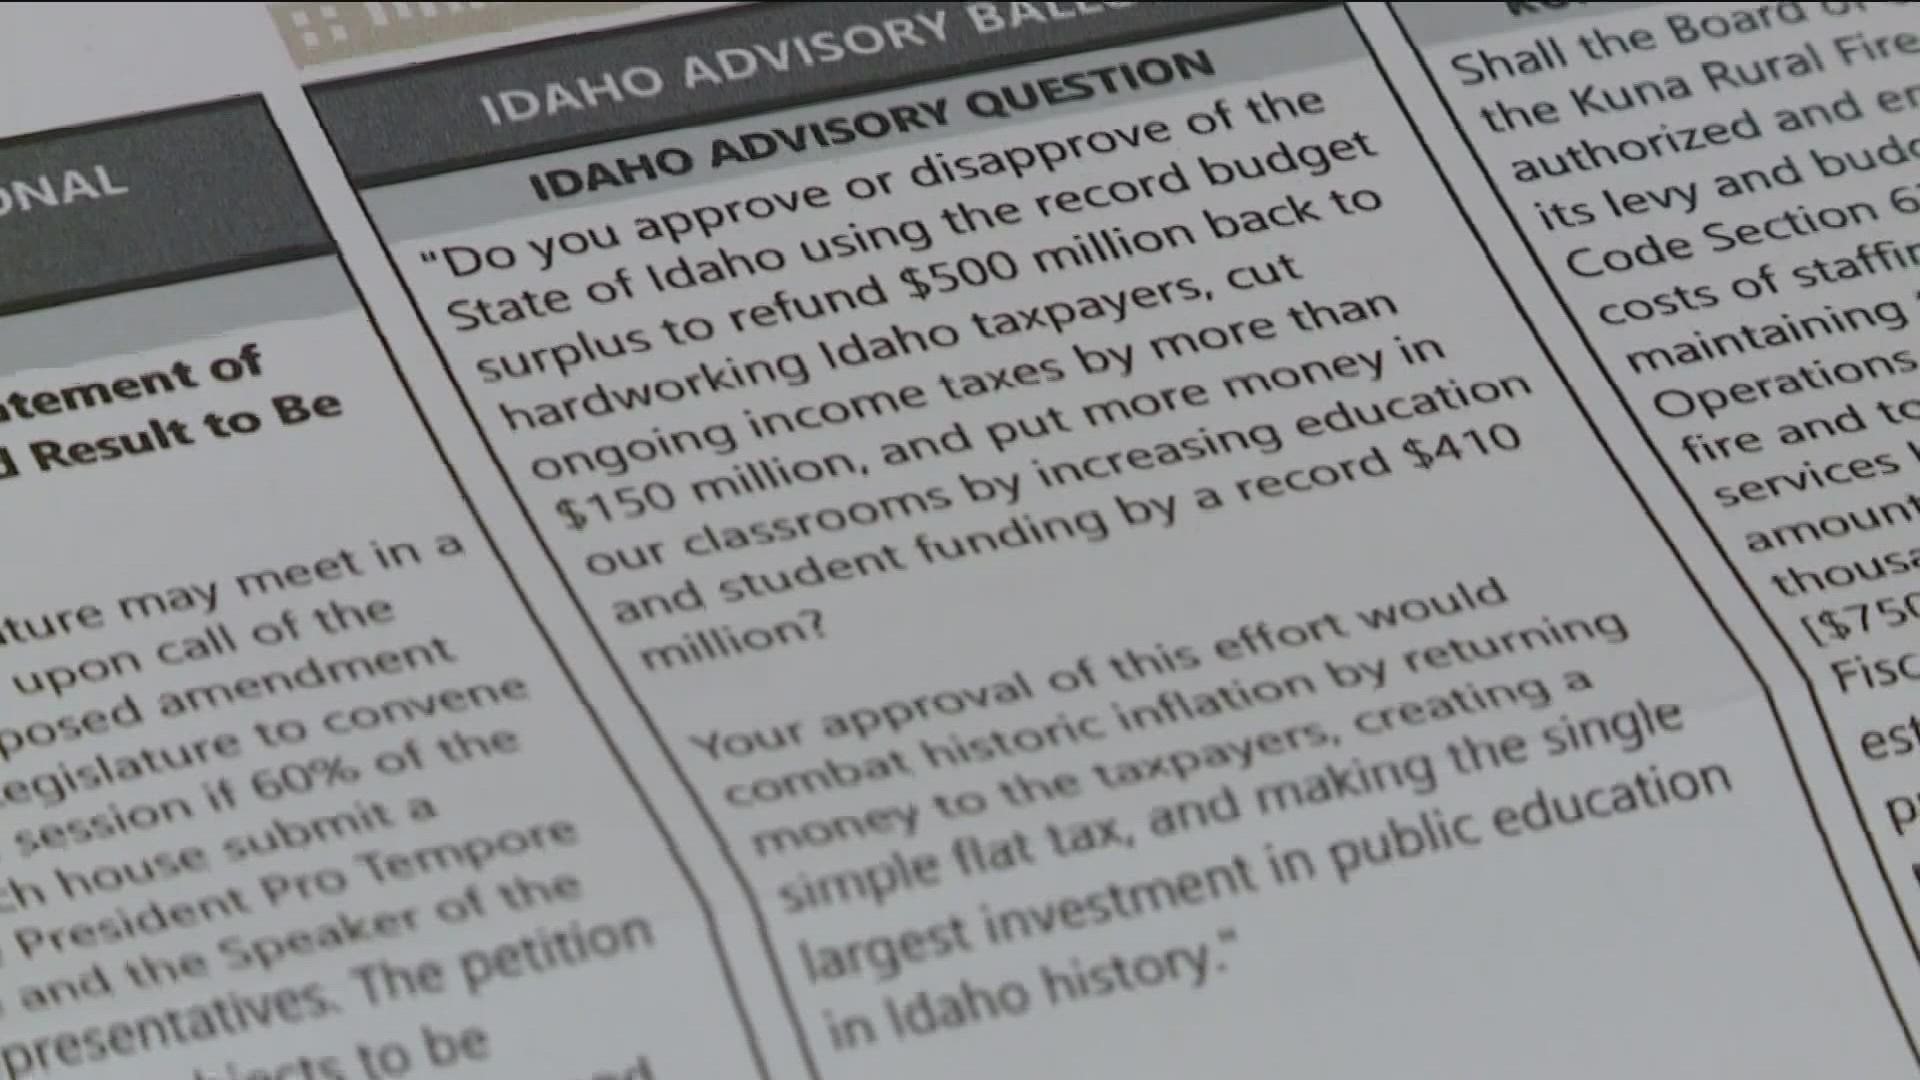 Between Twitter and Reddit, many Idahoans have said the advisory question on the 2022 general election ballot reads like an advertisement.